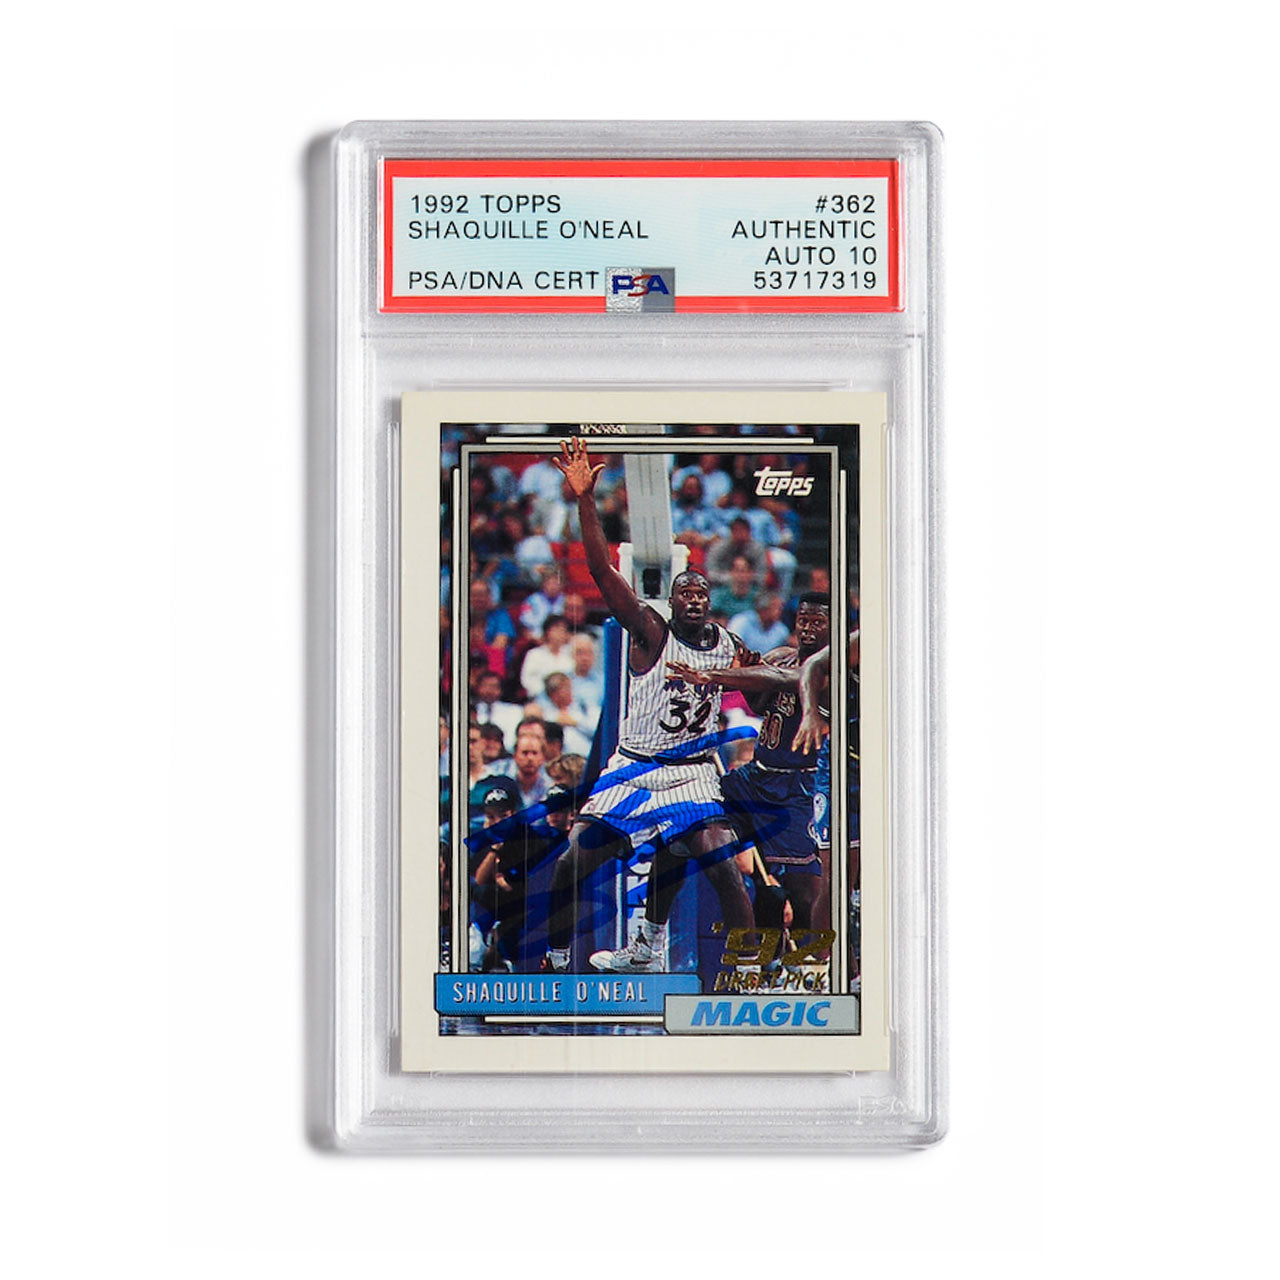 1992 Topps Shaquille O'Neal Autographed Rookie Card